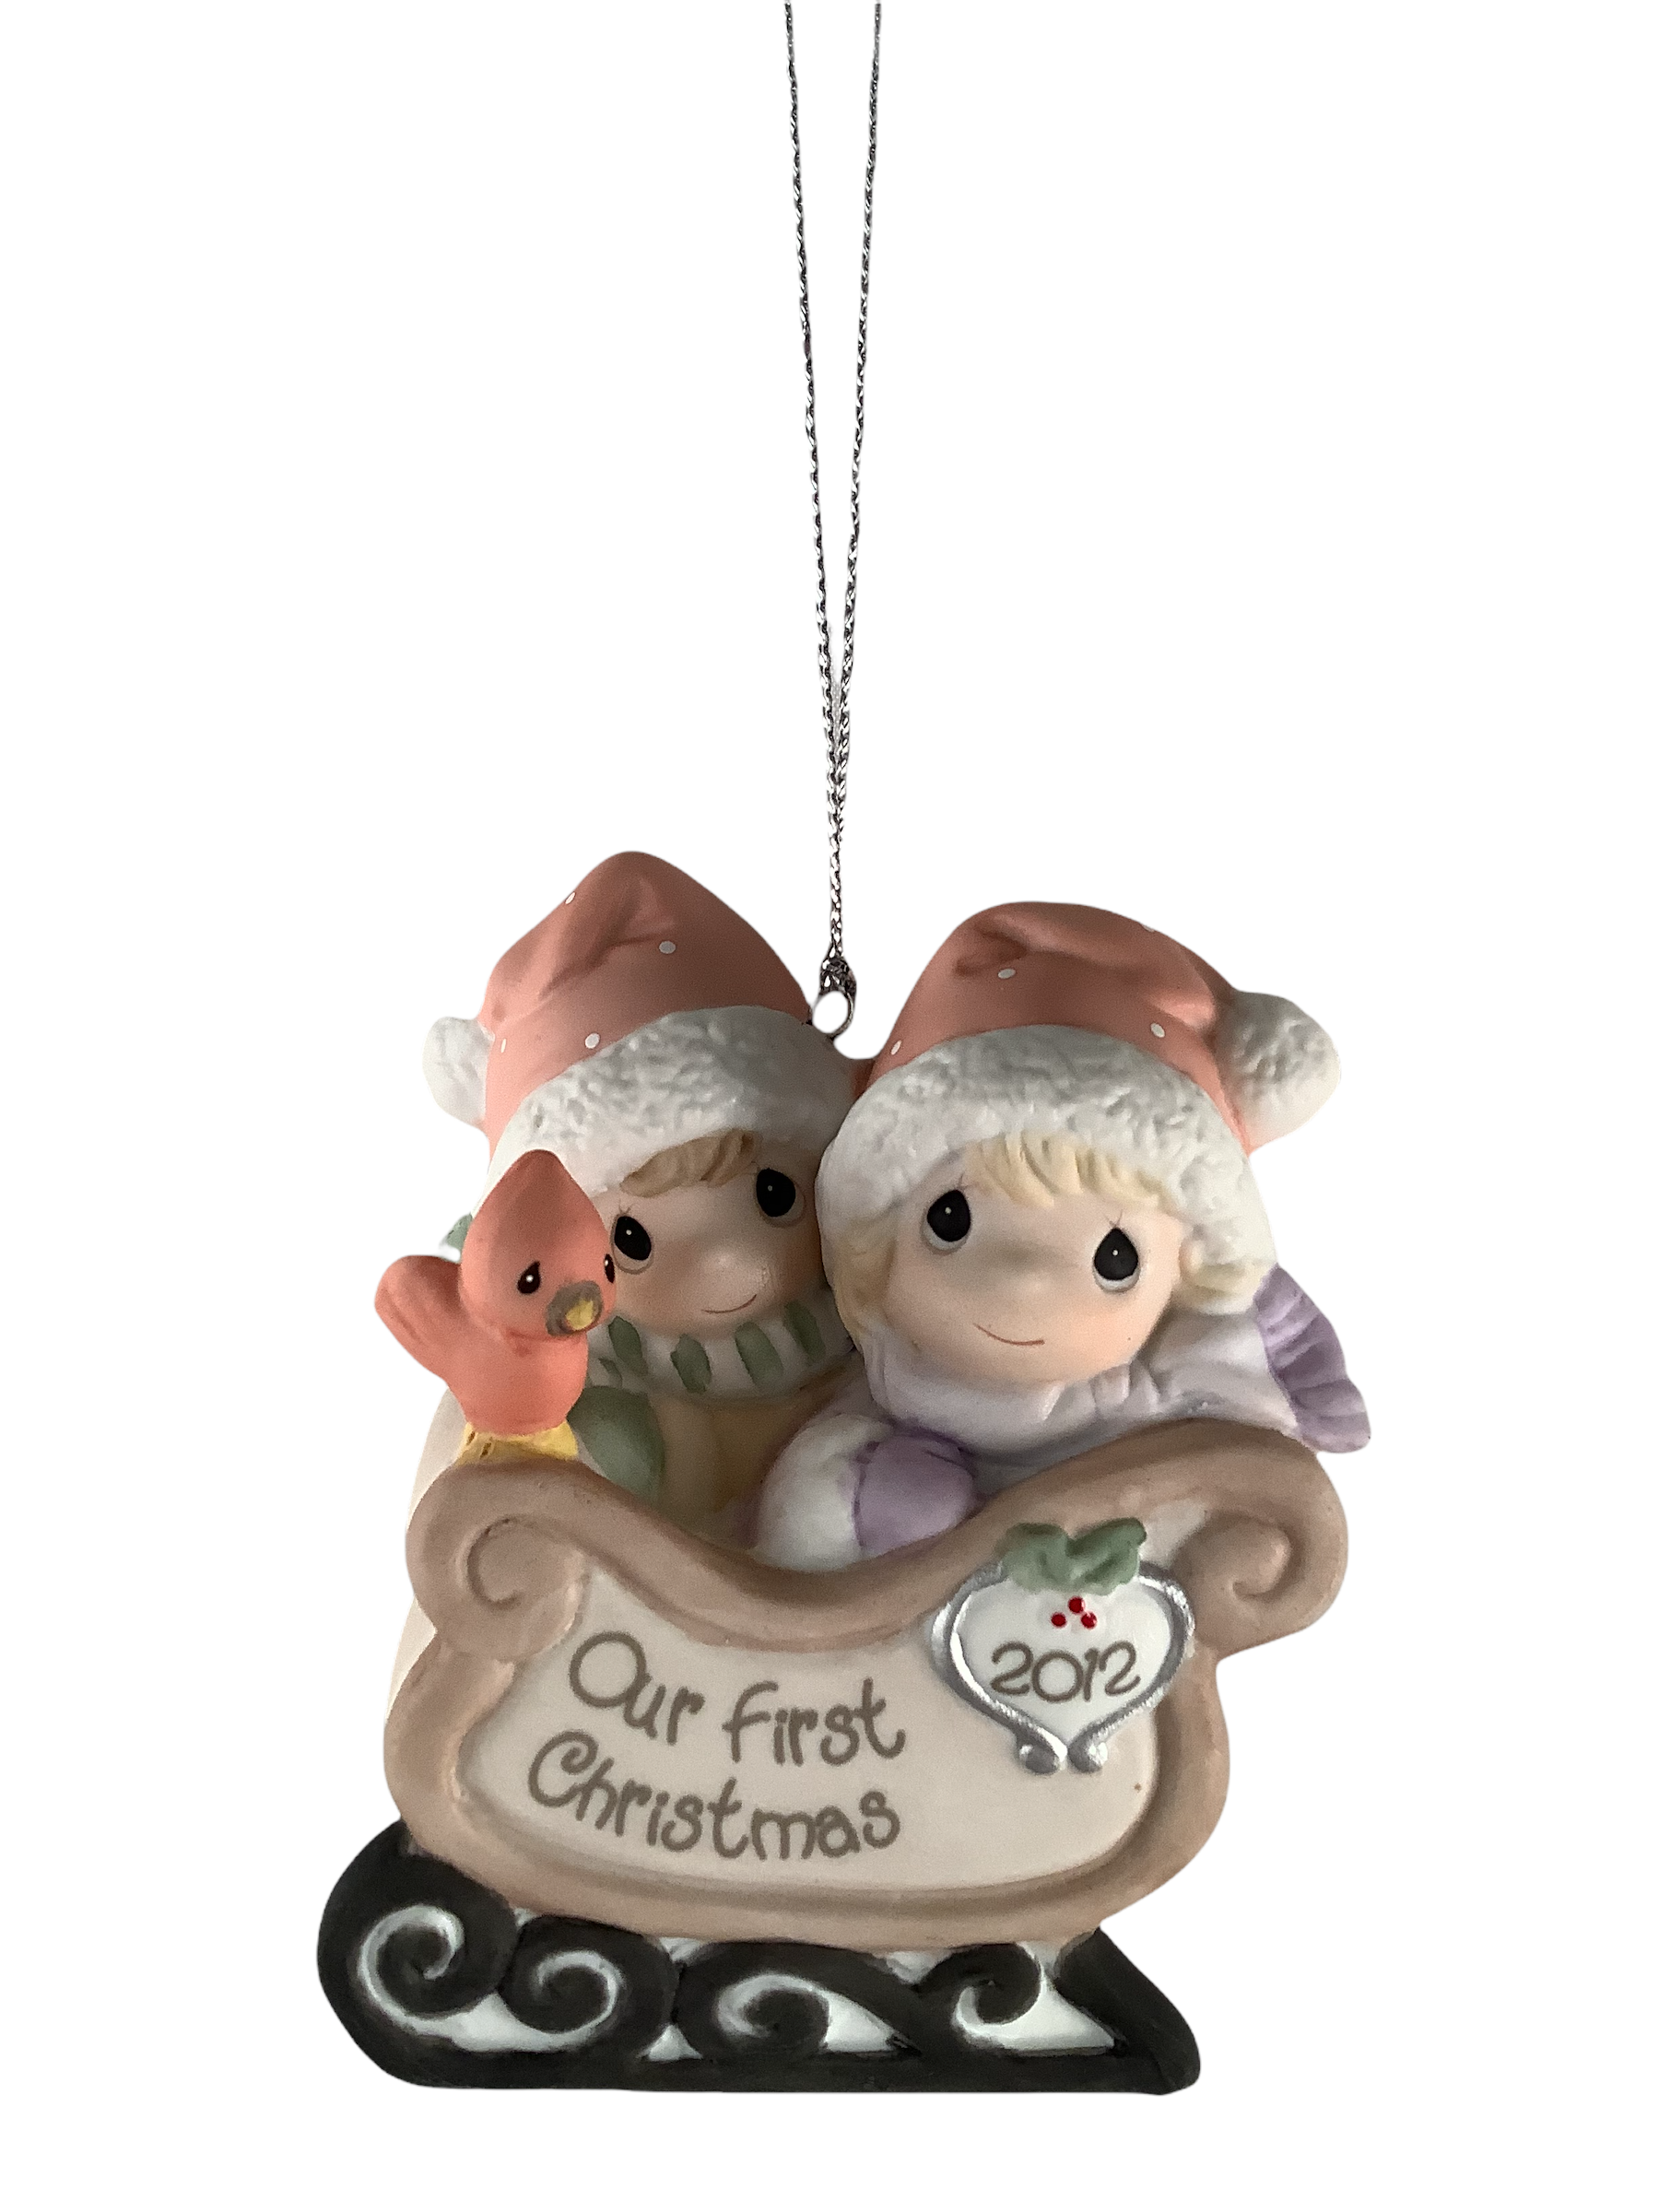 Our First Christmas Together 2012 - Precious Moment Ornament 